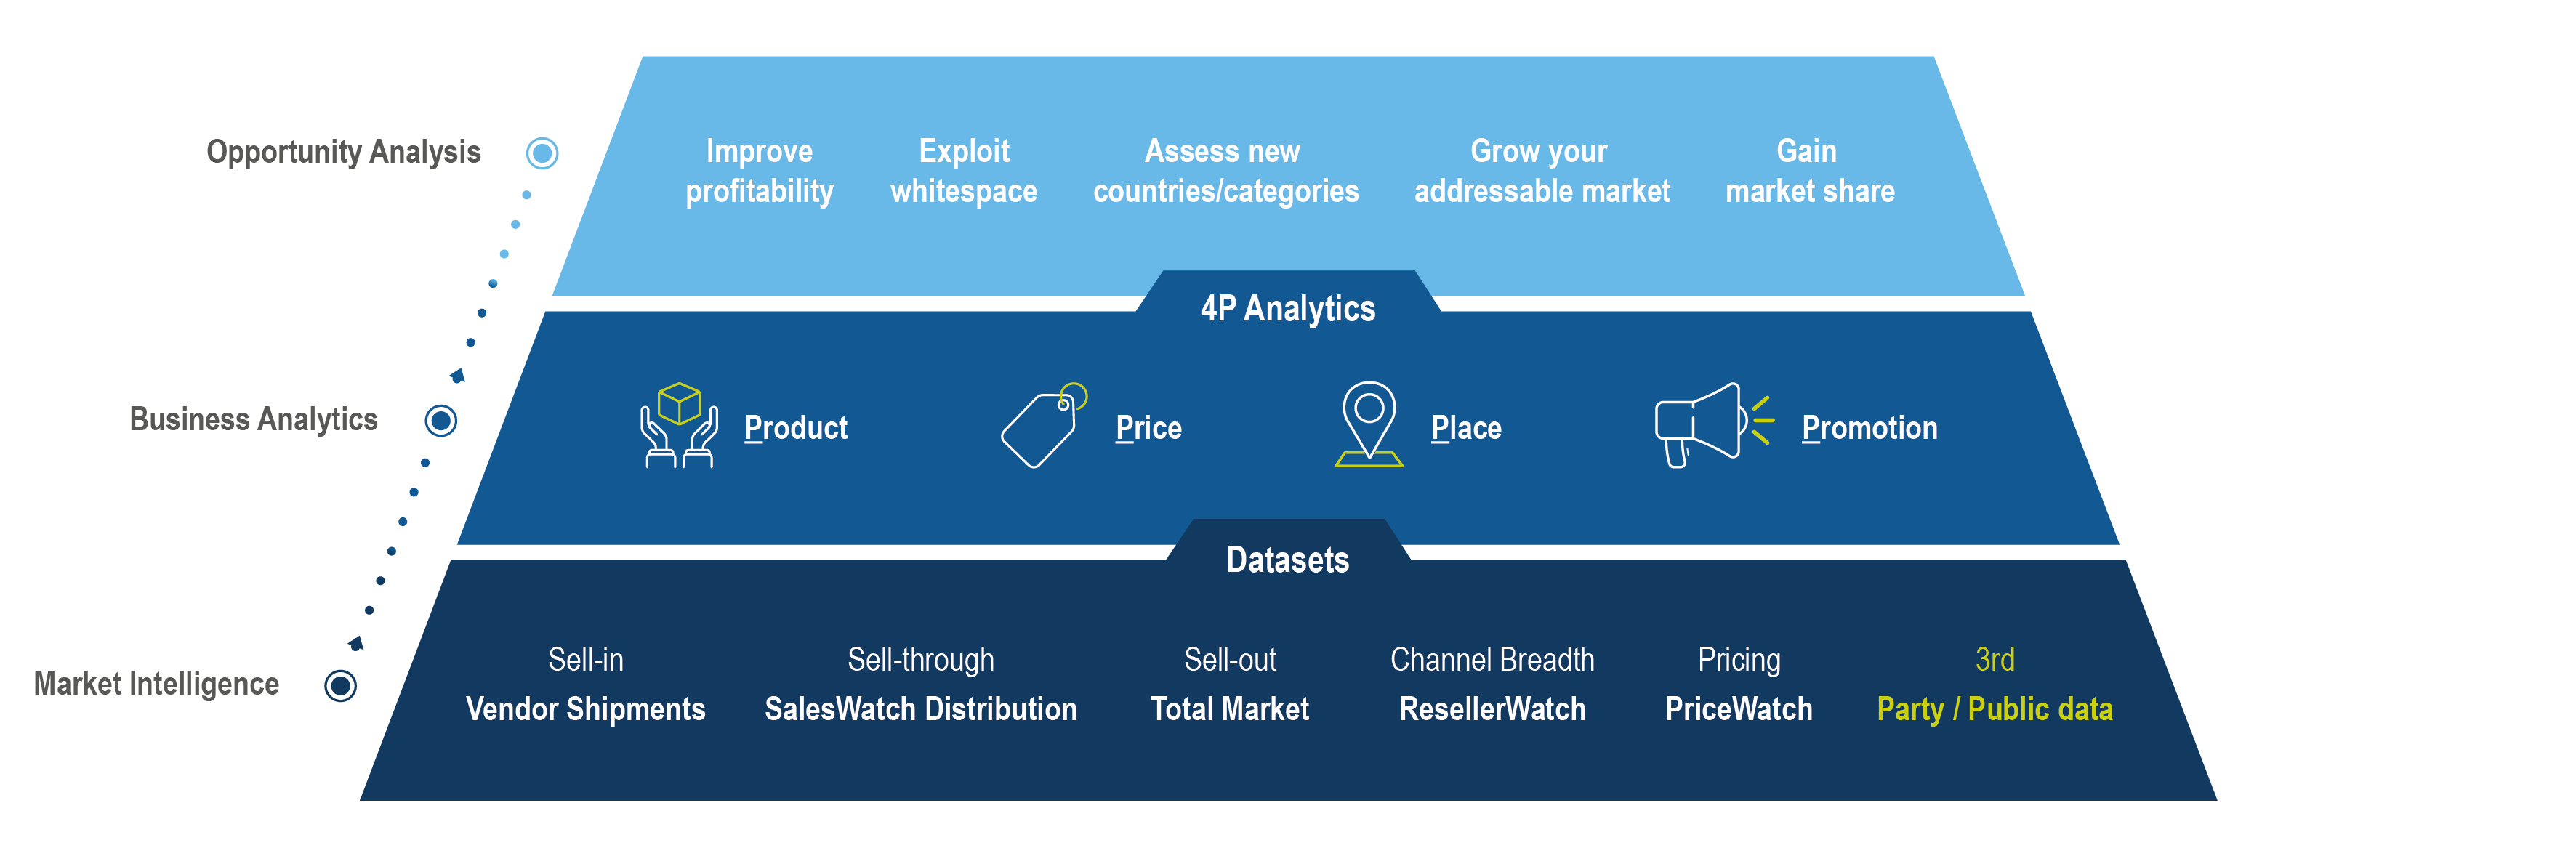 Solve your 4P challenges with tailored analytics solutions </br>built on a normalised view of the complete market